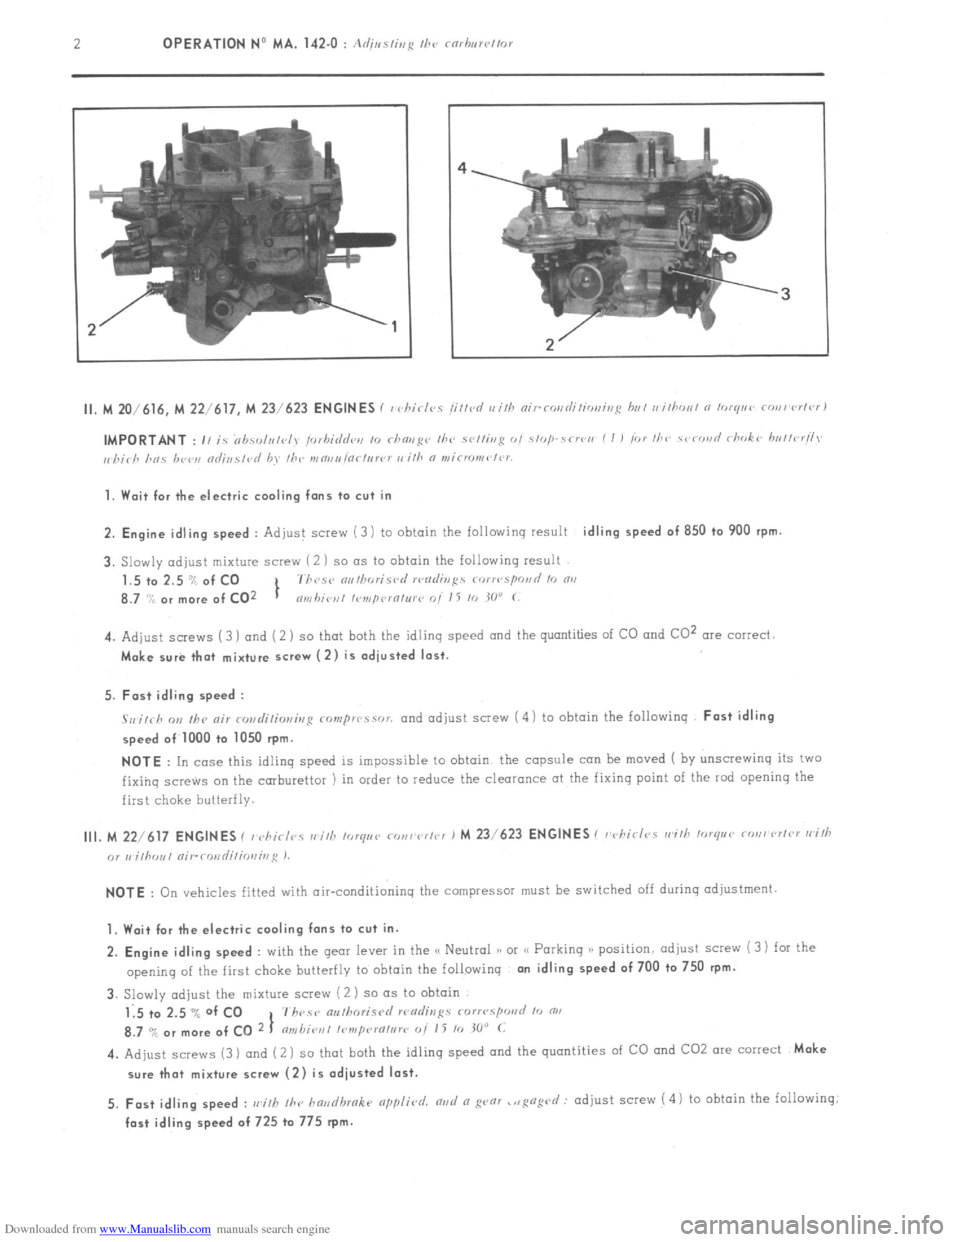 Citroen CX 1985 1.G Workshop Manual Downloaded from www.Manualslib.com manuals search engine 2 OPERATION No MA. 142-O : A<lj,,s/;,,g /he ro,brw~/or 
1. Wait for the electric cooling fans to cut in 
2. Engine idling speed 
: Adjust screw